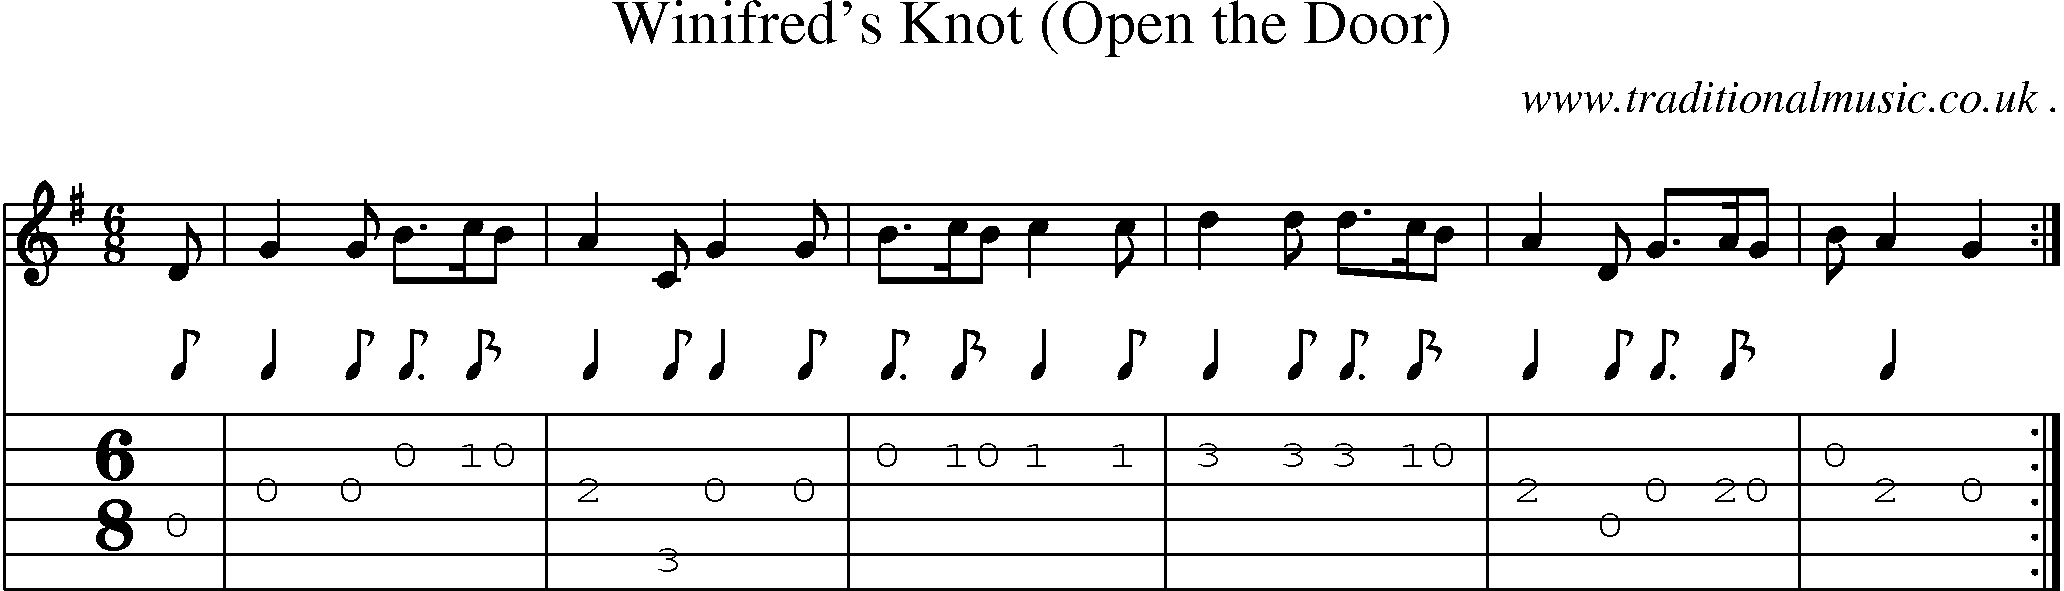 Sheet-Music and Guitar Tabs for Winifreds Knot (open The Door)